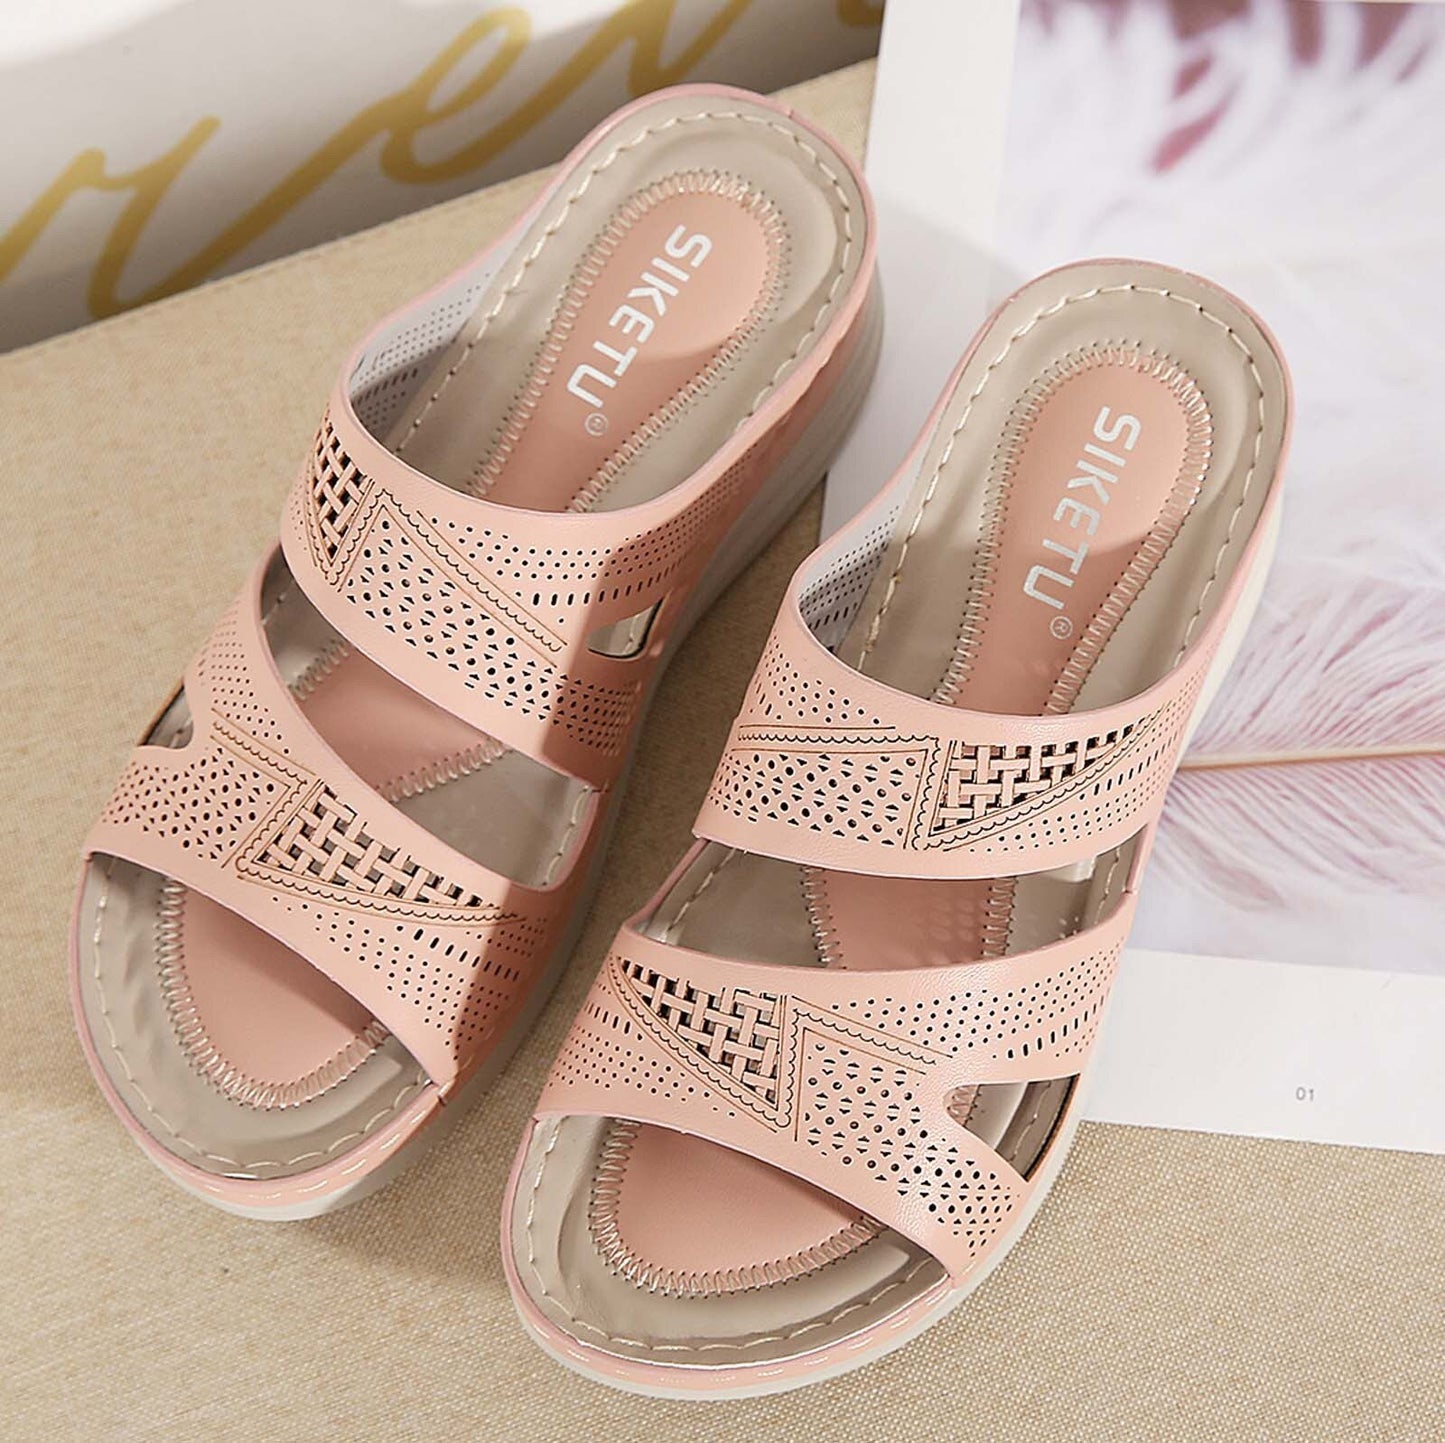 OCW Breathable Soft Leather Made Comfortable Sandals